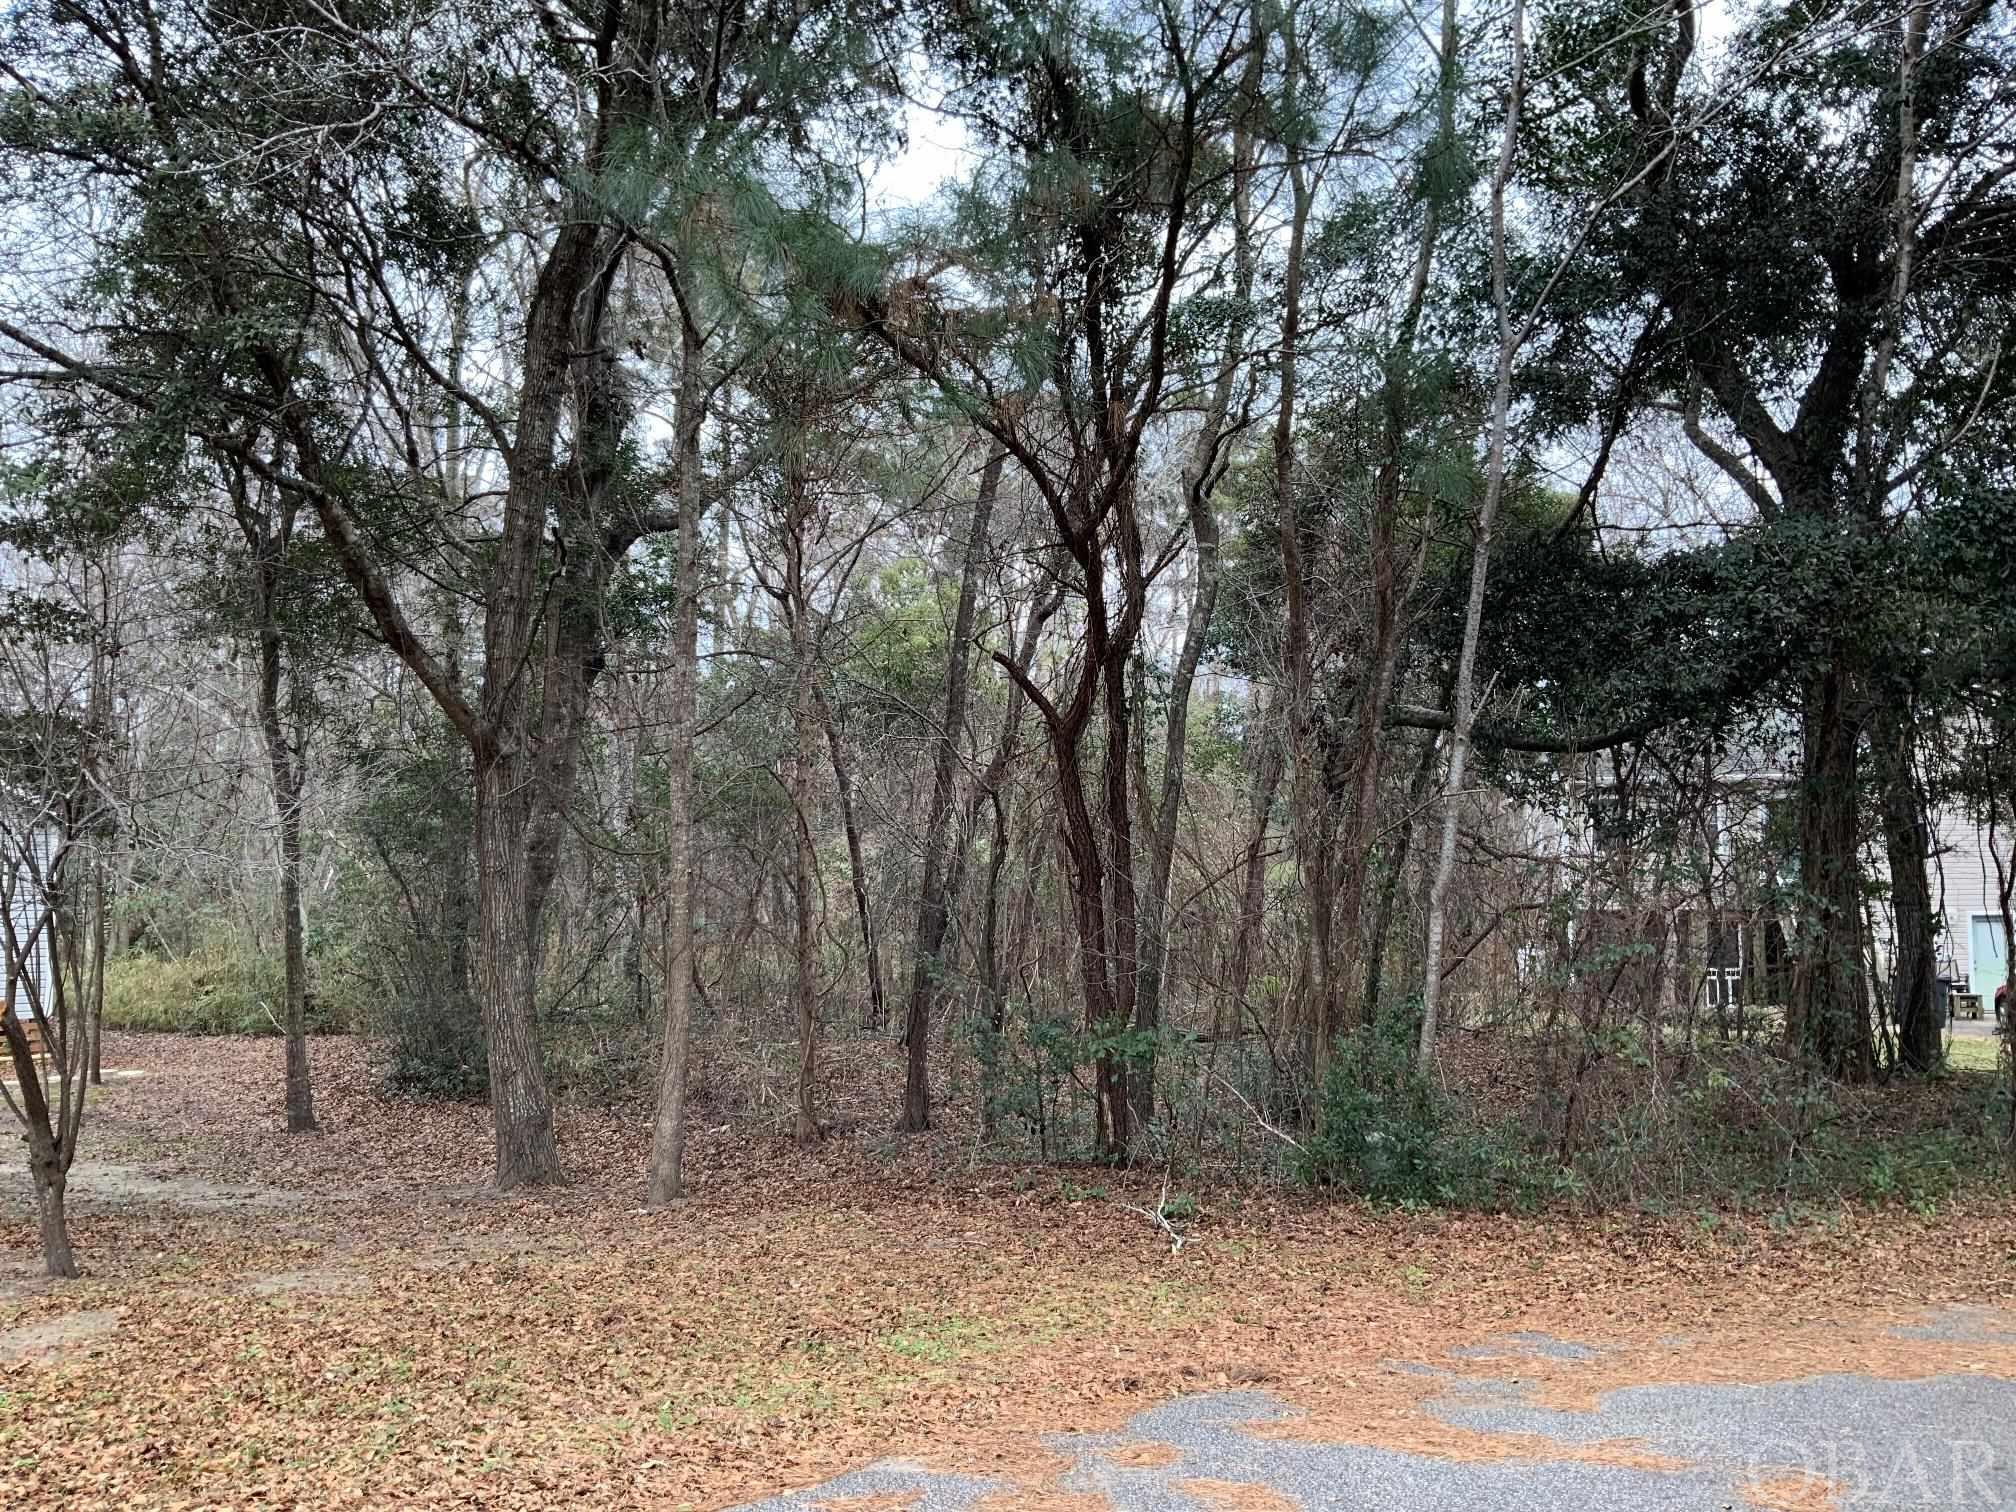 Vacant lot Approximately 18,000 sq ft, lot nestled in the woods.  Large wooded lot located in quiet year round neighborhood in Section 2 of the Sea Scape subdivision. Great Location centrally located on the west side in Kitty Hawk close to beaches, schools, restaurants, shopping, grocery, and medical facilities.  The traffic light at Eckner and N Croatan highway make it easy access to all that the Outer Banks has to offer.